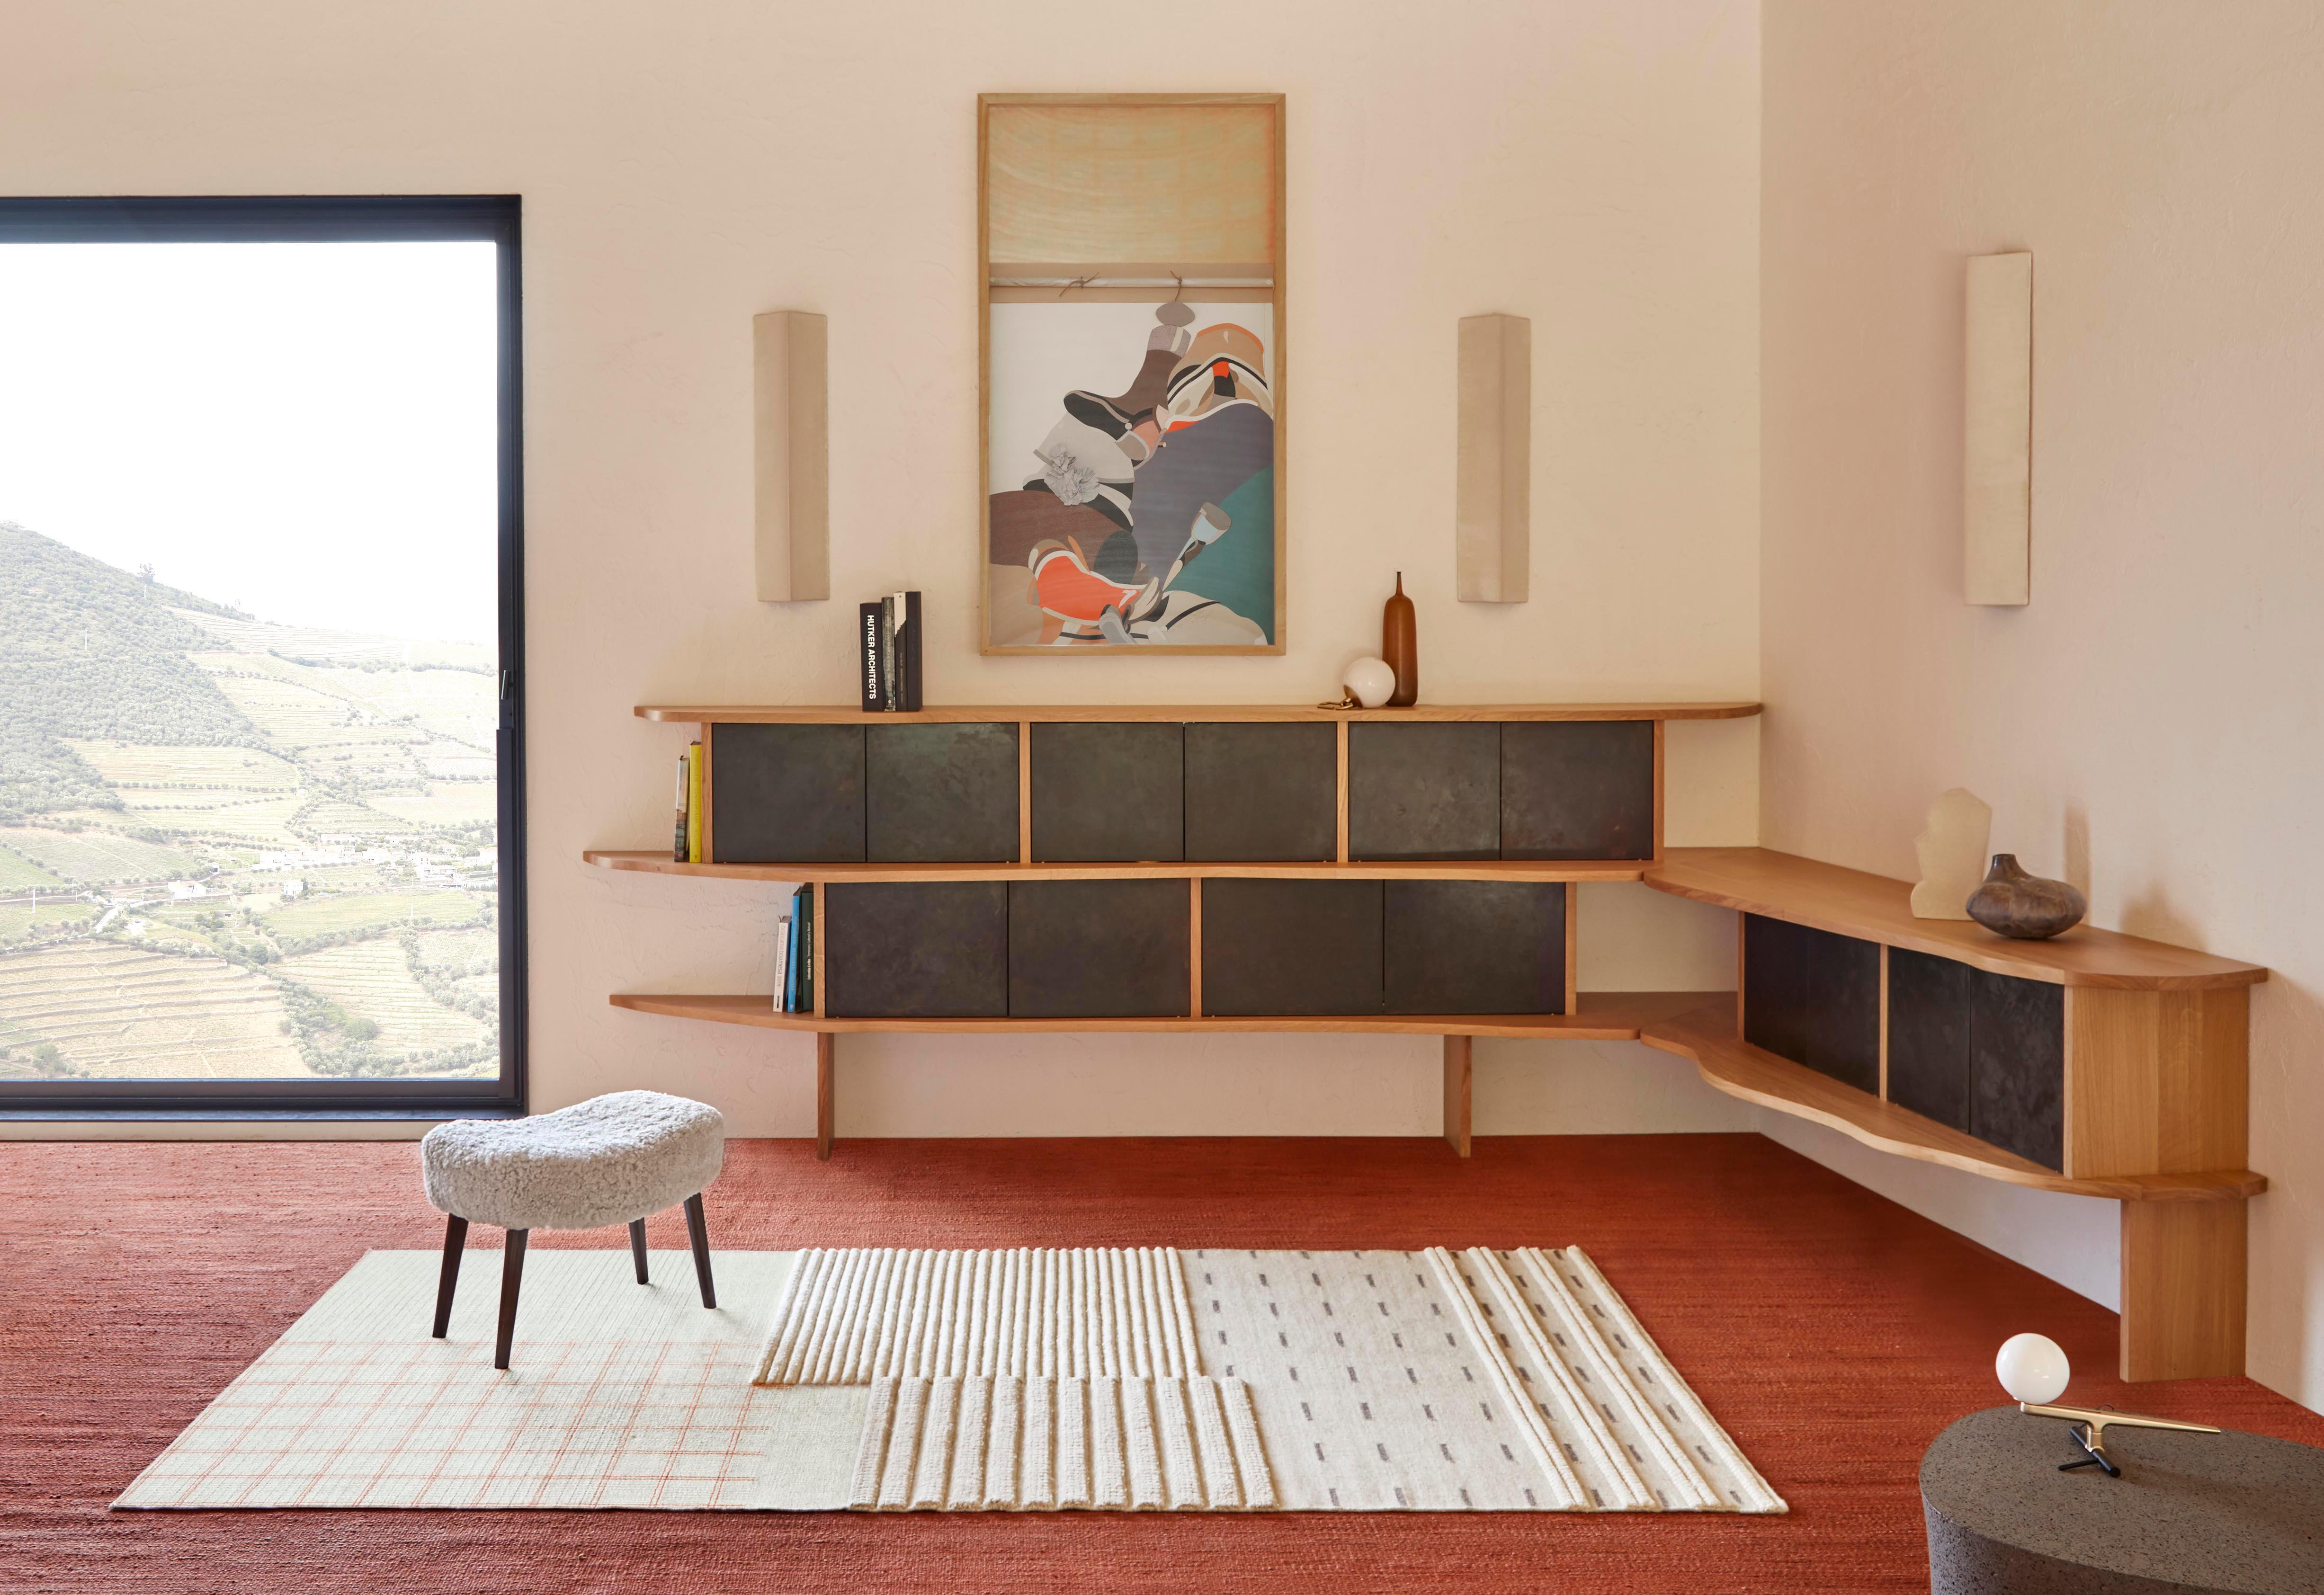 Neri&Hu questions the sofa typology. Once the normal typology of a piece of furniture is broken down into its components, seating and rug become a single space.

The back component draws from the origins of GAN as a textile brand, by referencing